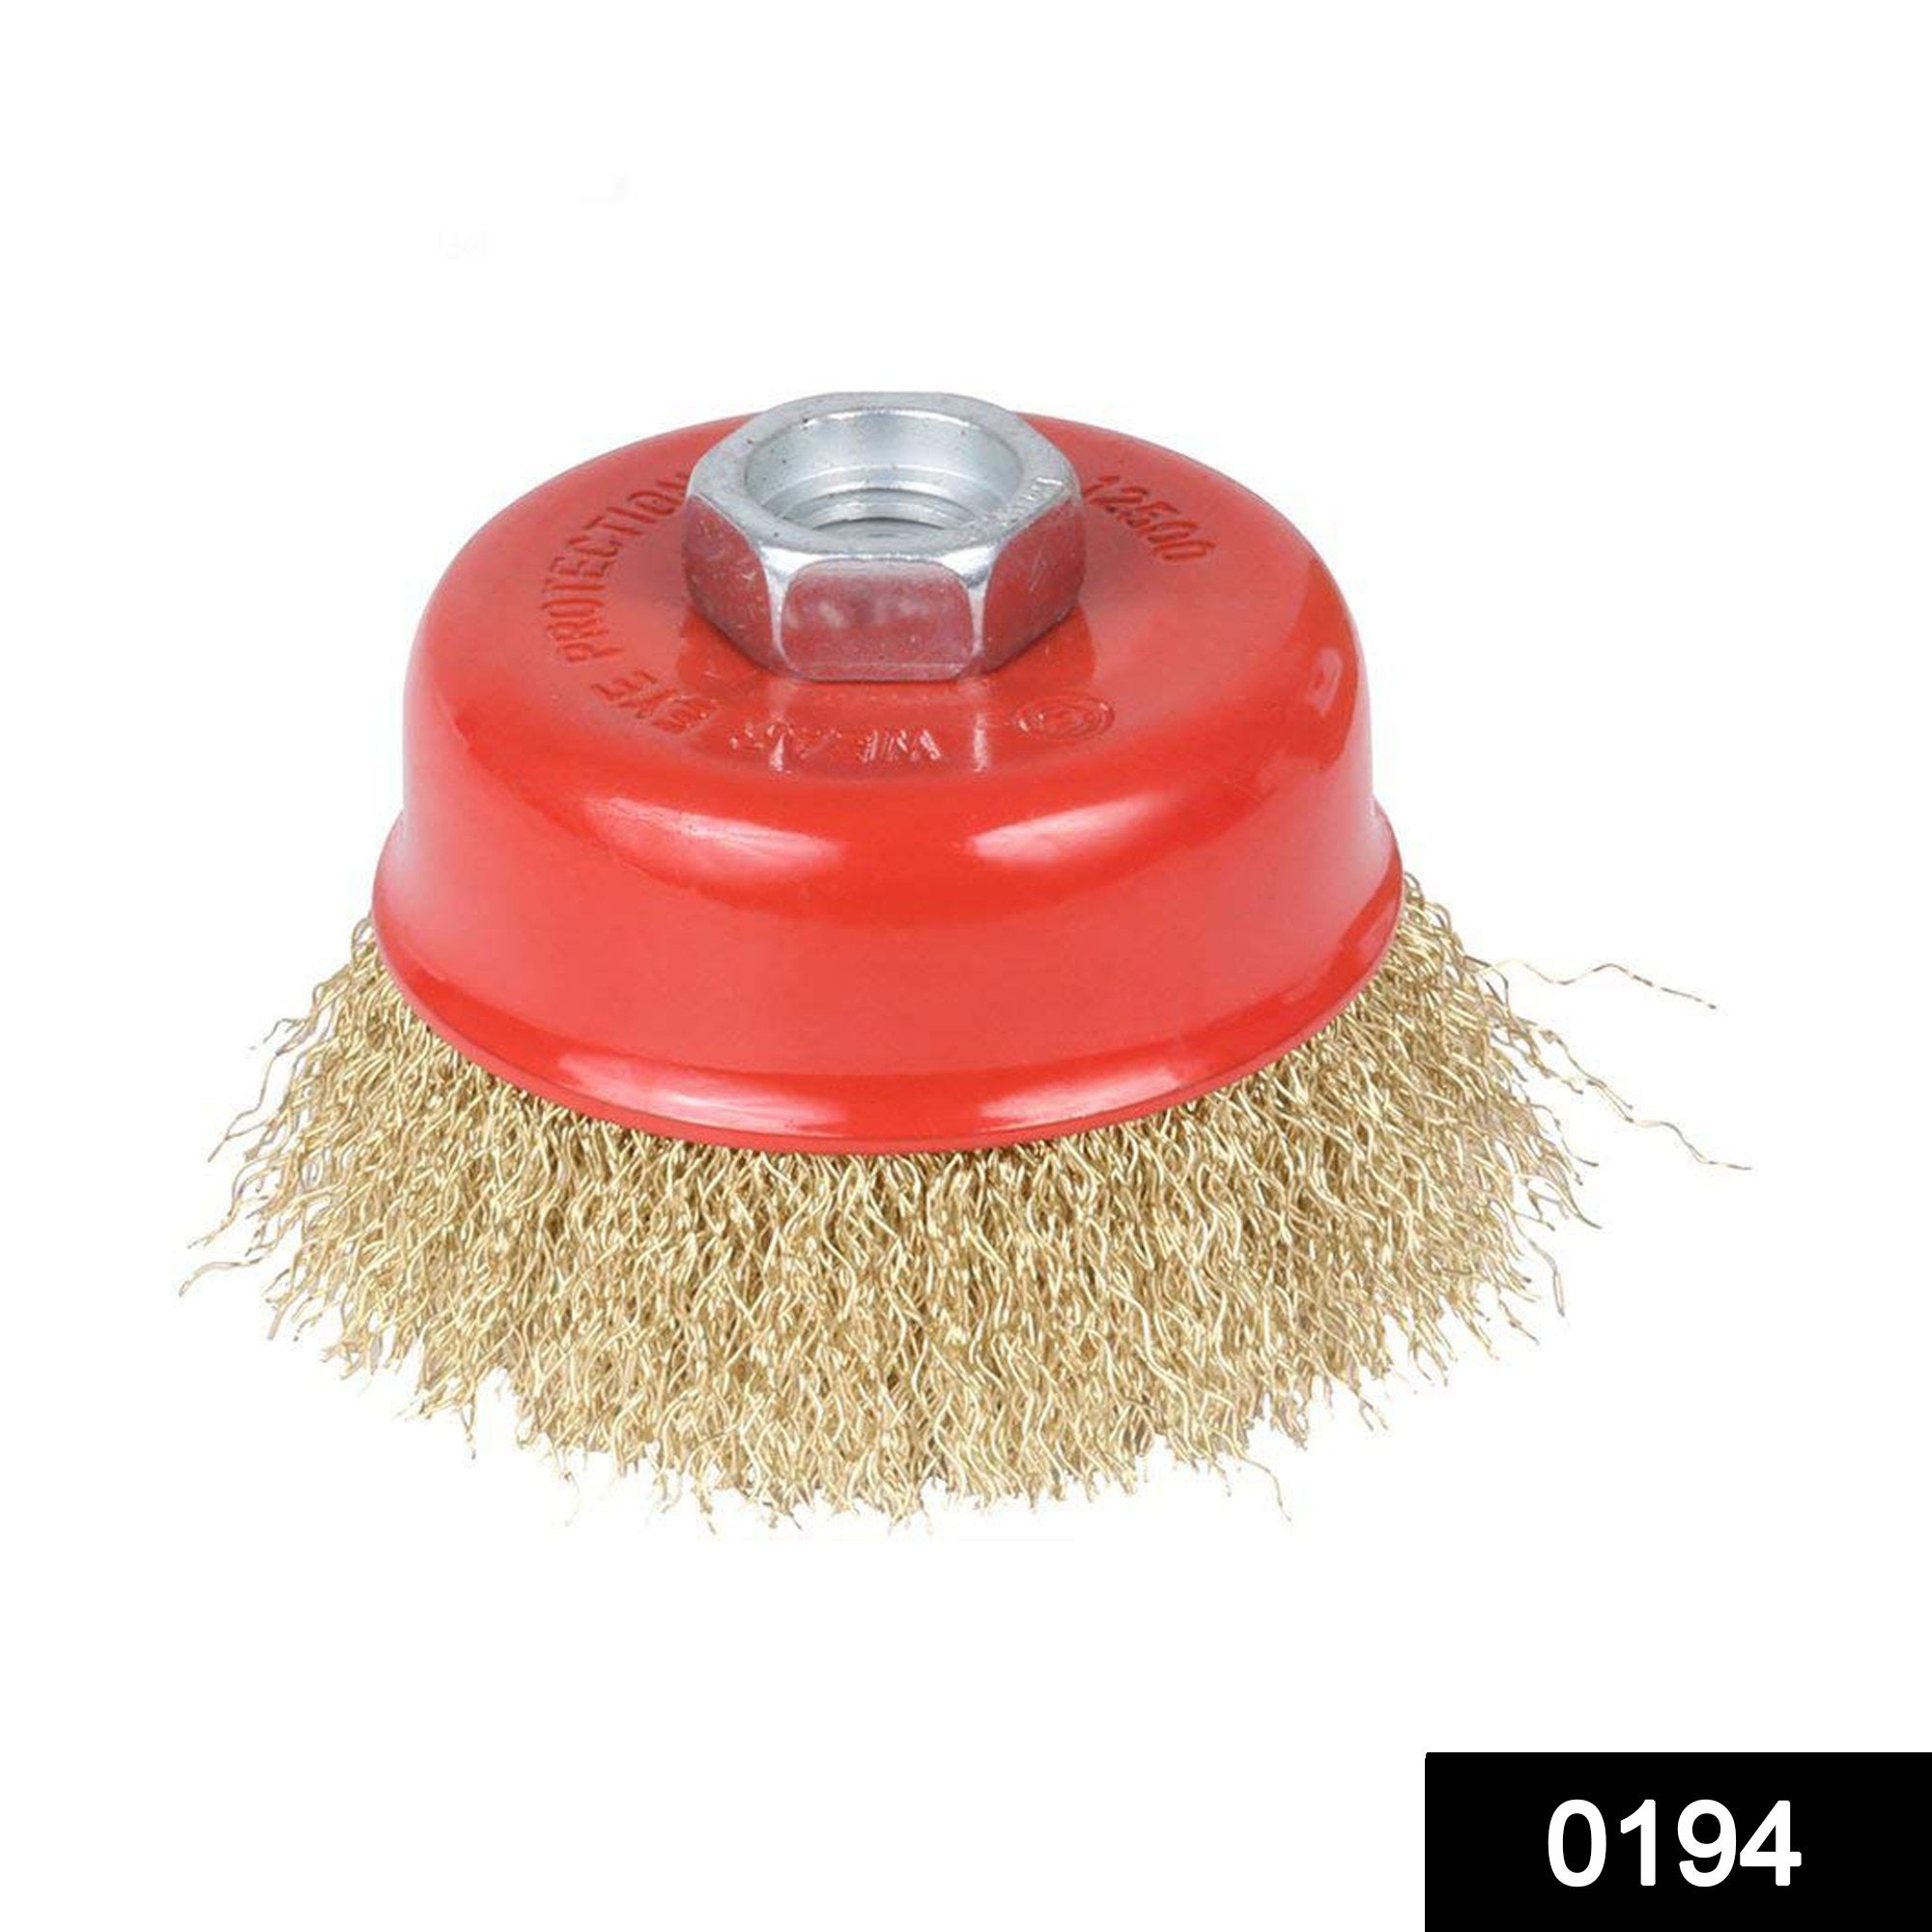 homyl 85mm wire wheel brush cup metal rust cleaner cleaning polishing